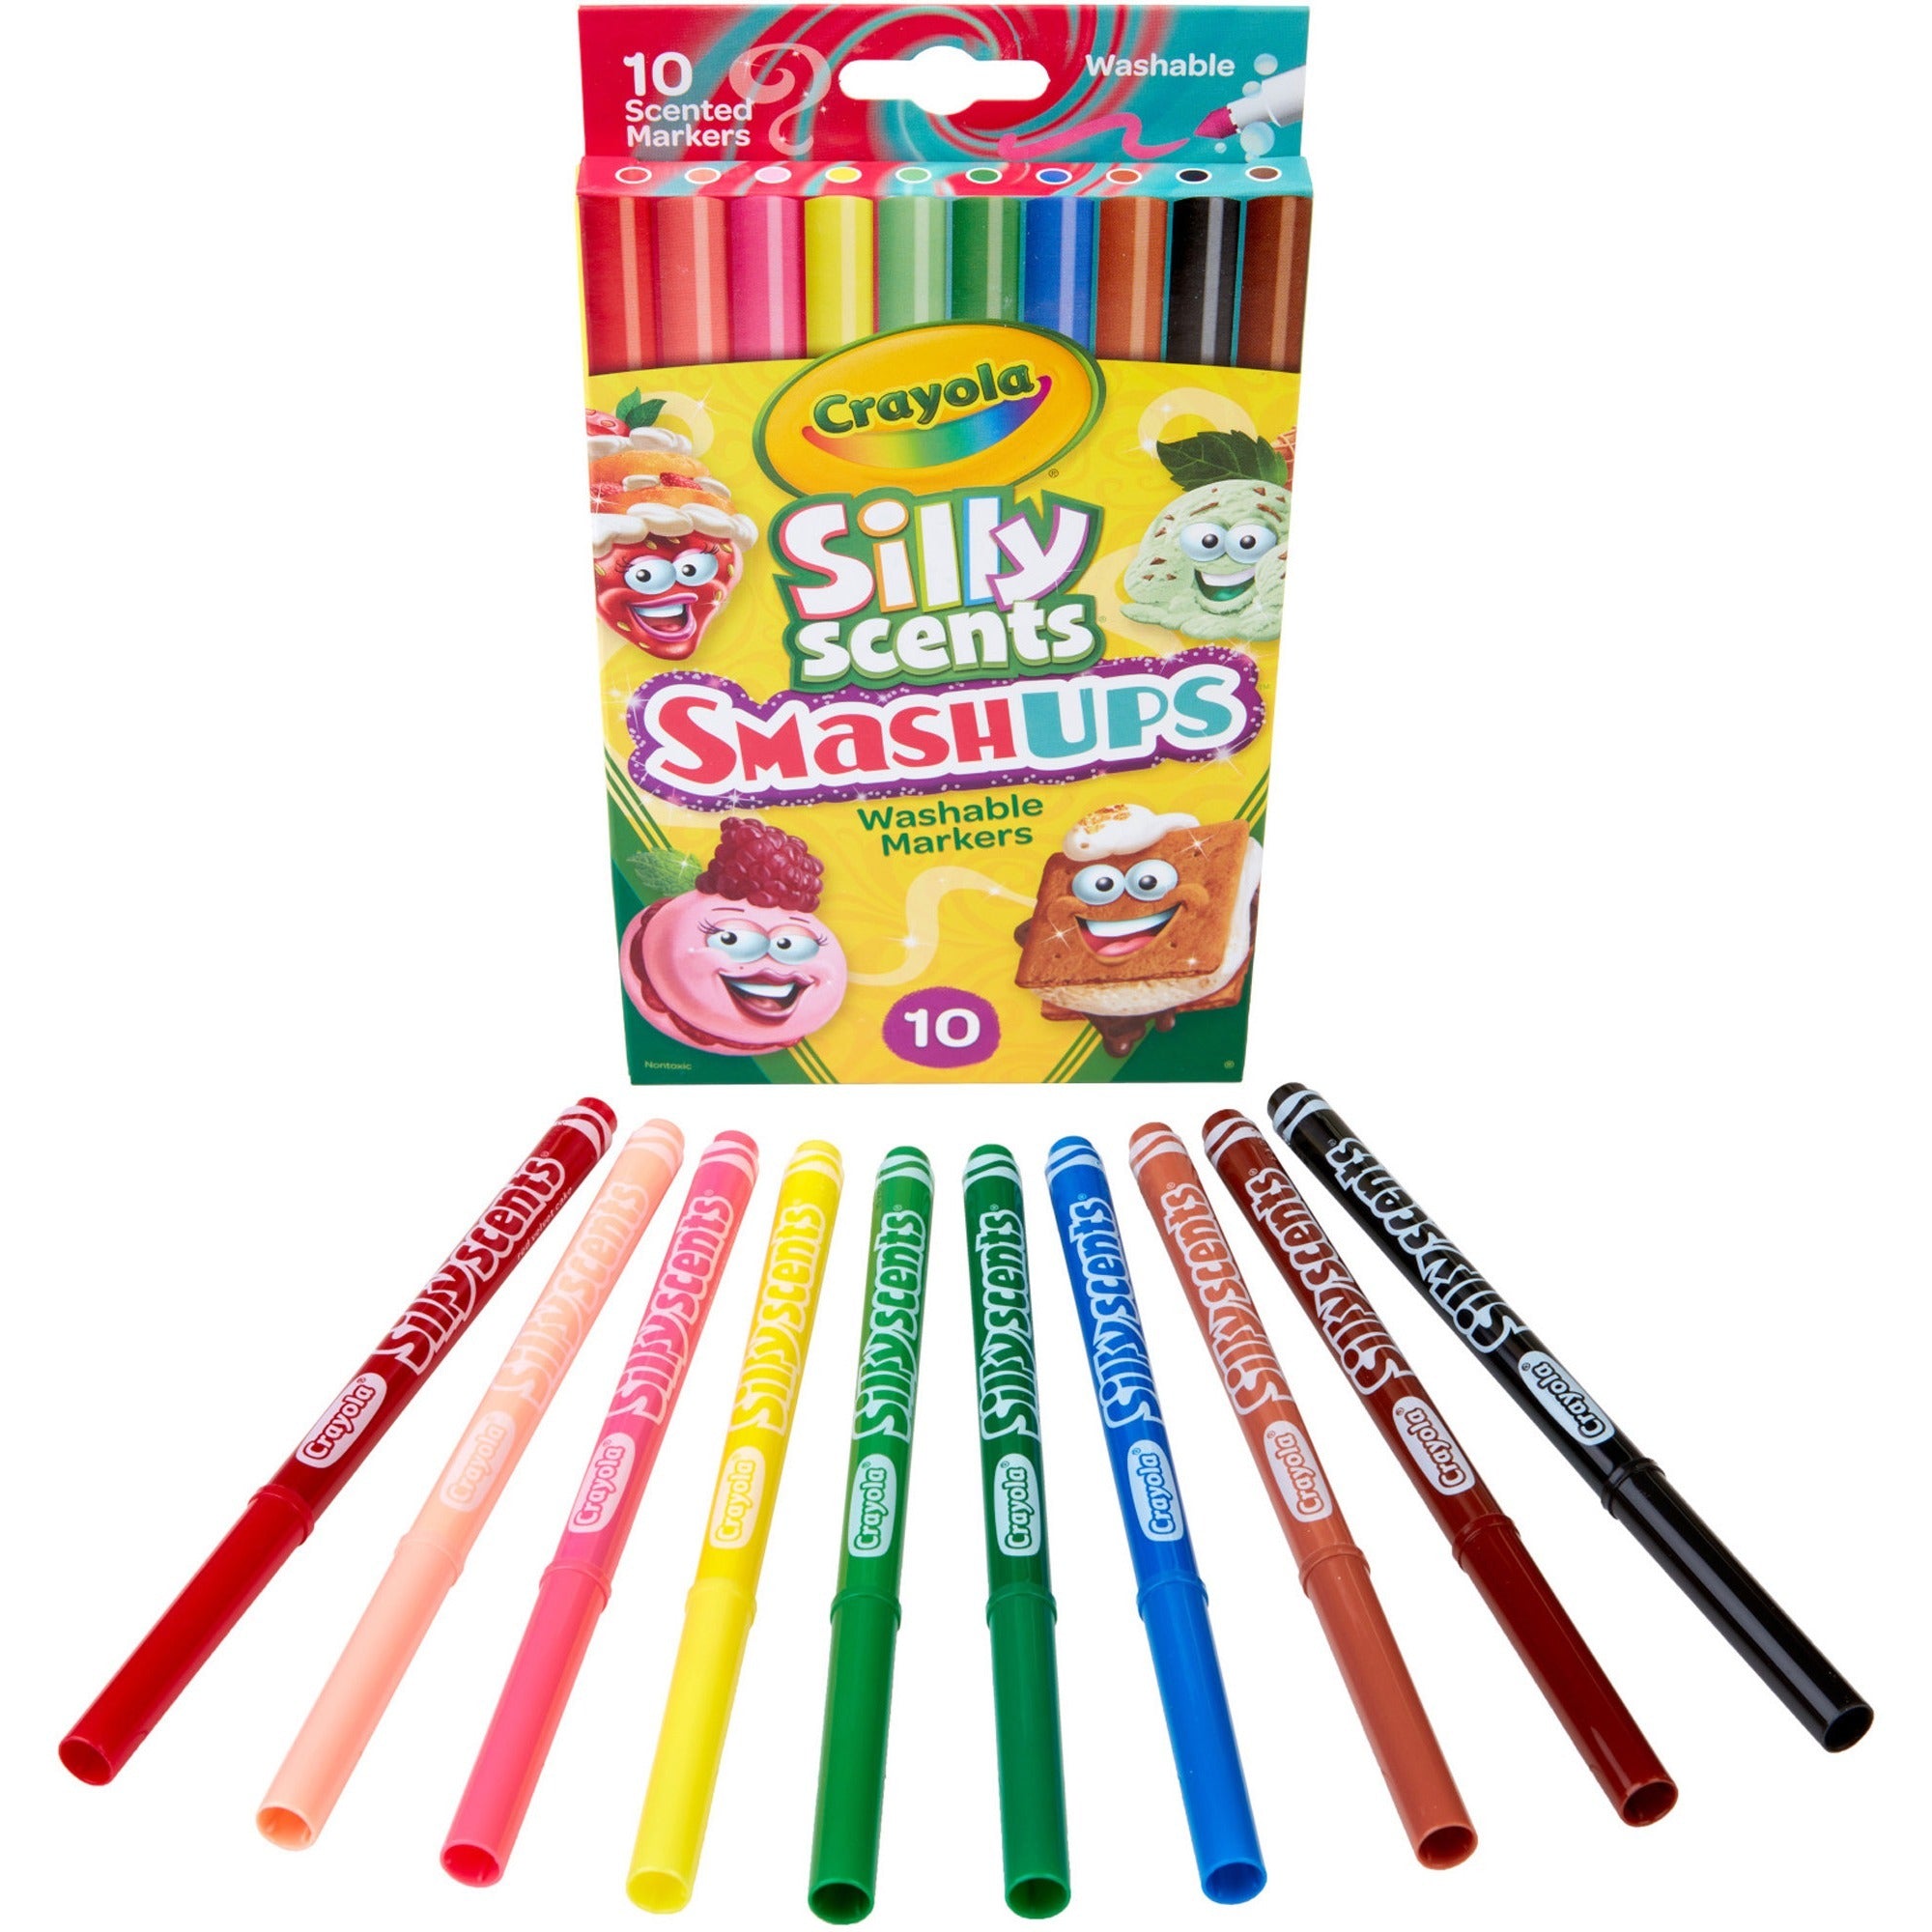 crayola-silly-scents-slim-scented-washable-markers-broad-marker-point-1-pack_cyo588275 - 1